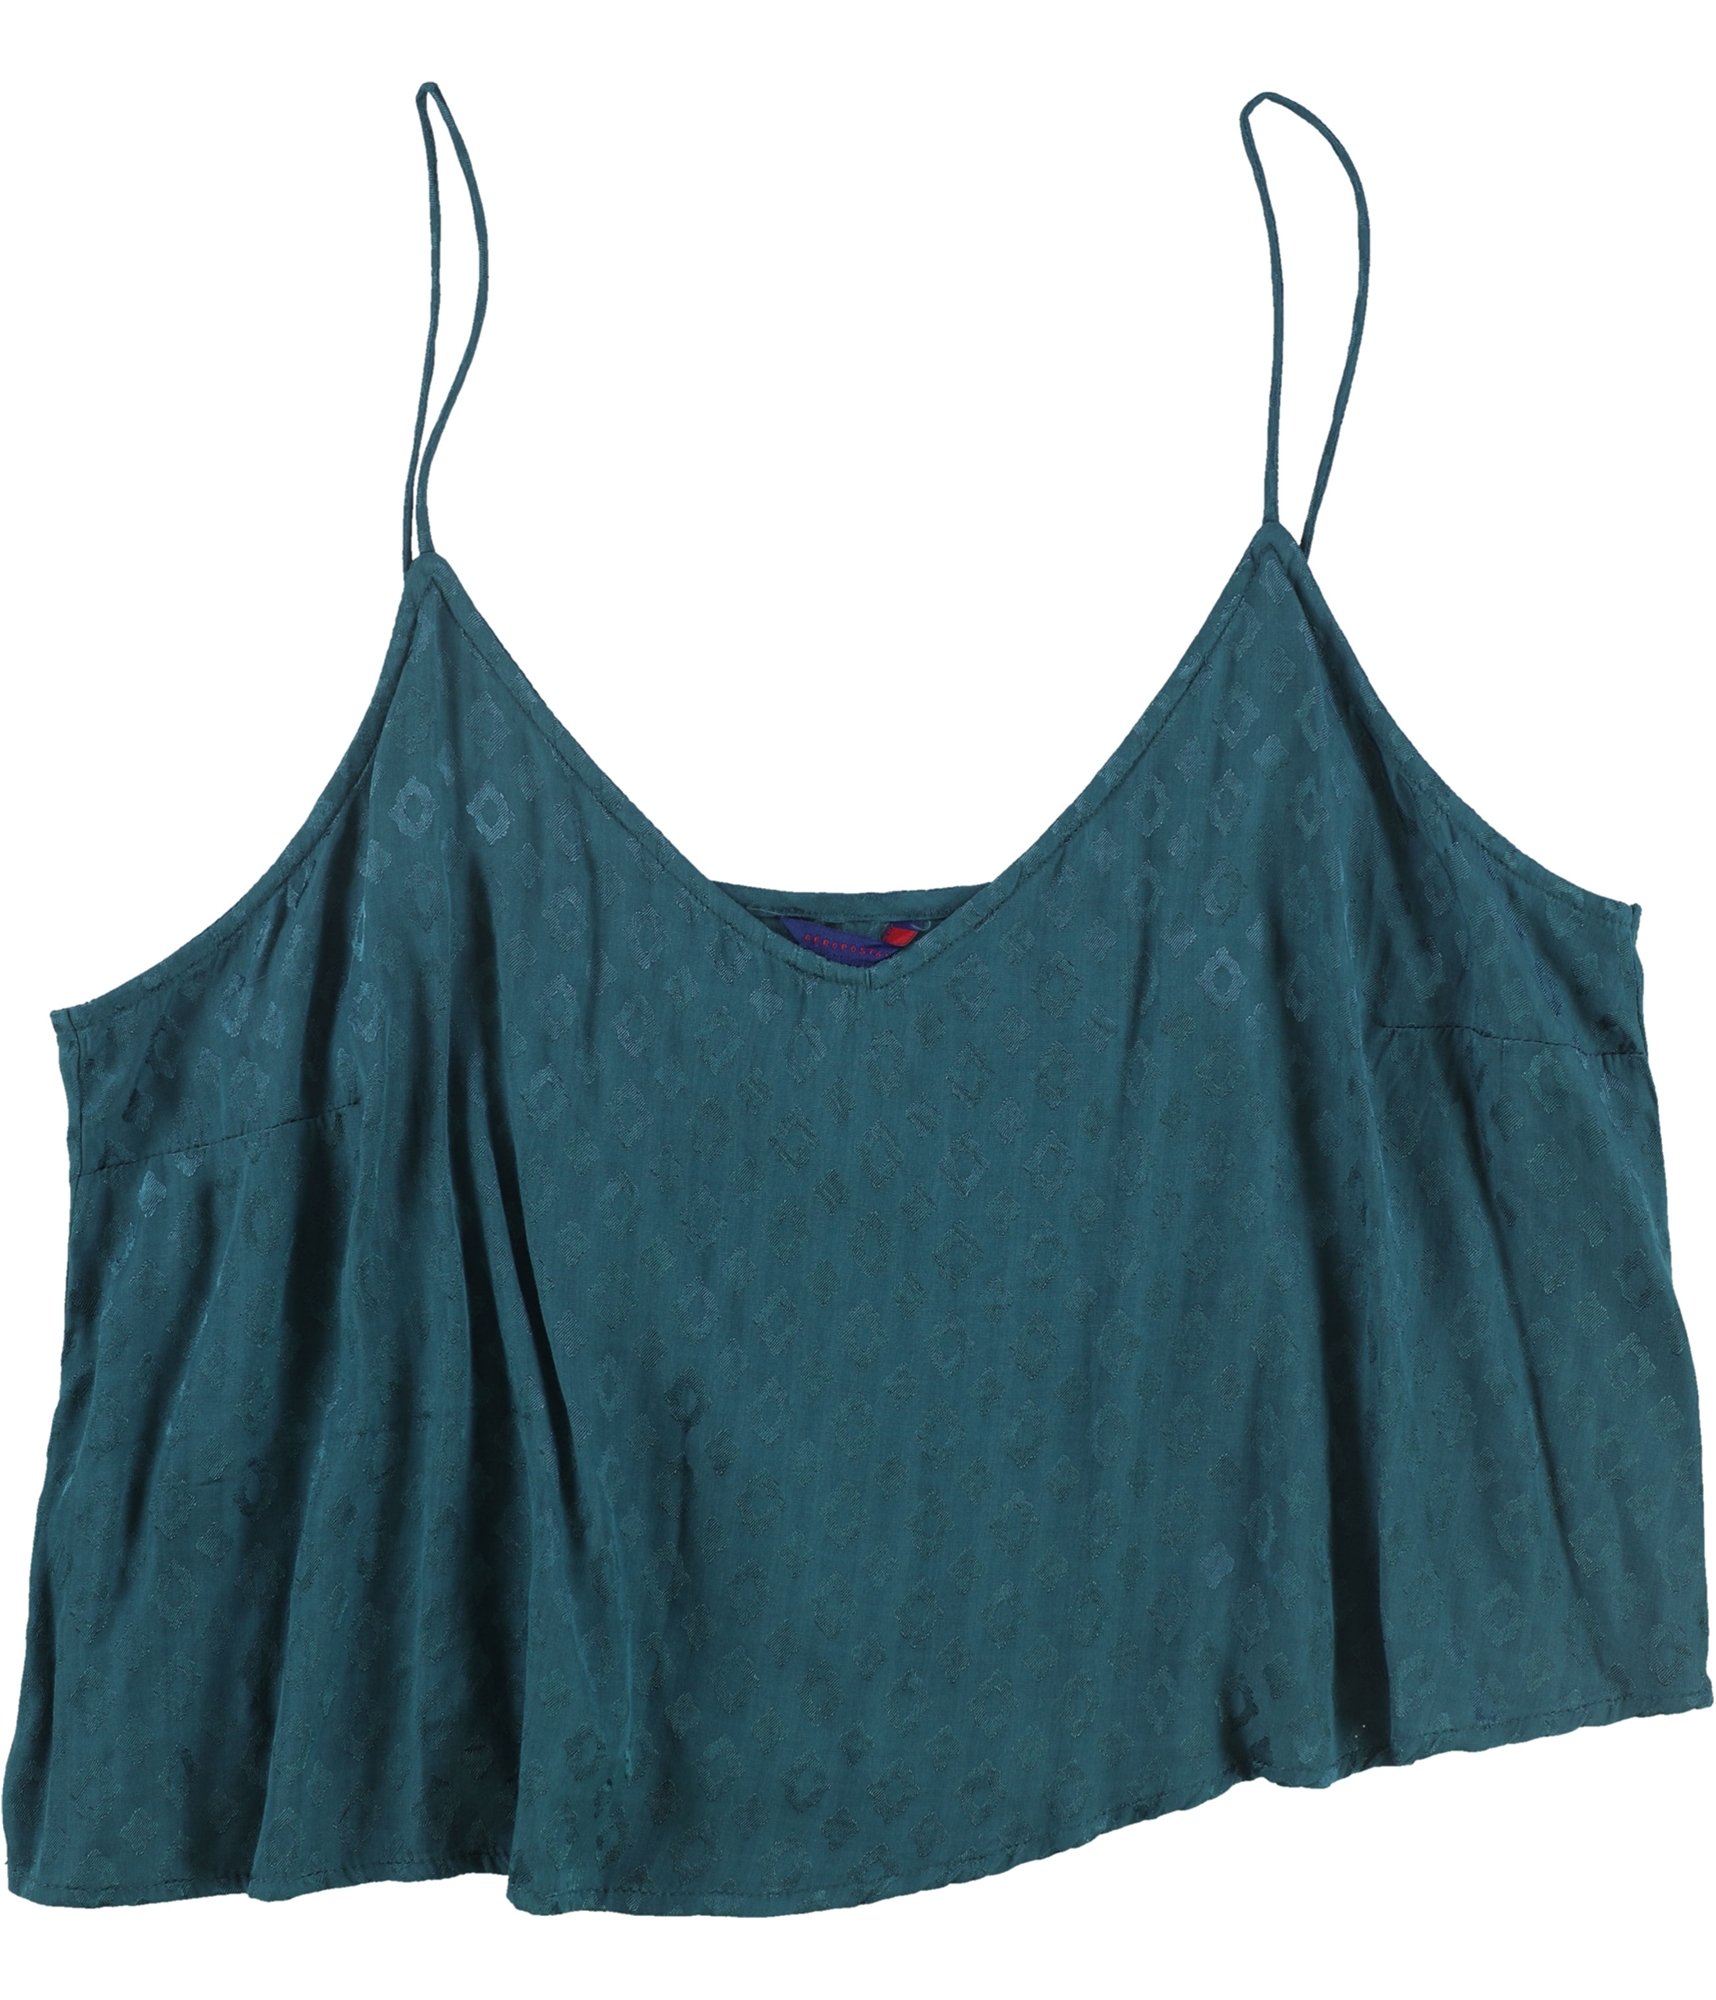 Buy AEROPOSTALE Womens Cropped Floral Cami Tank Top at